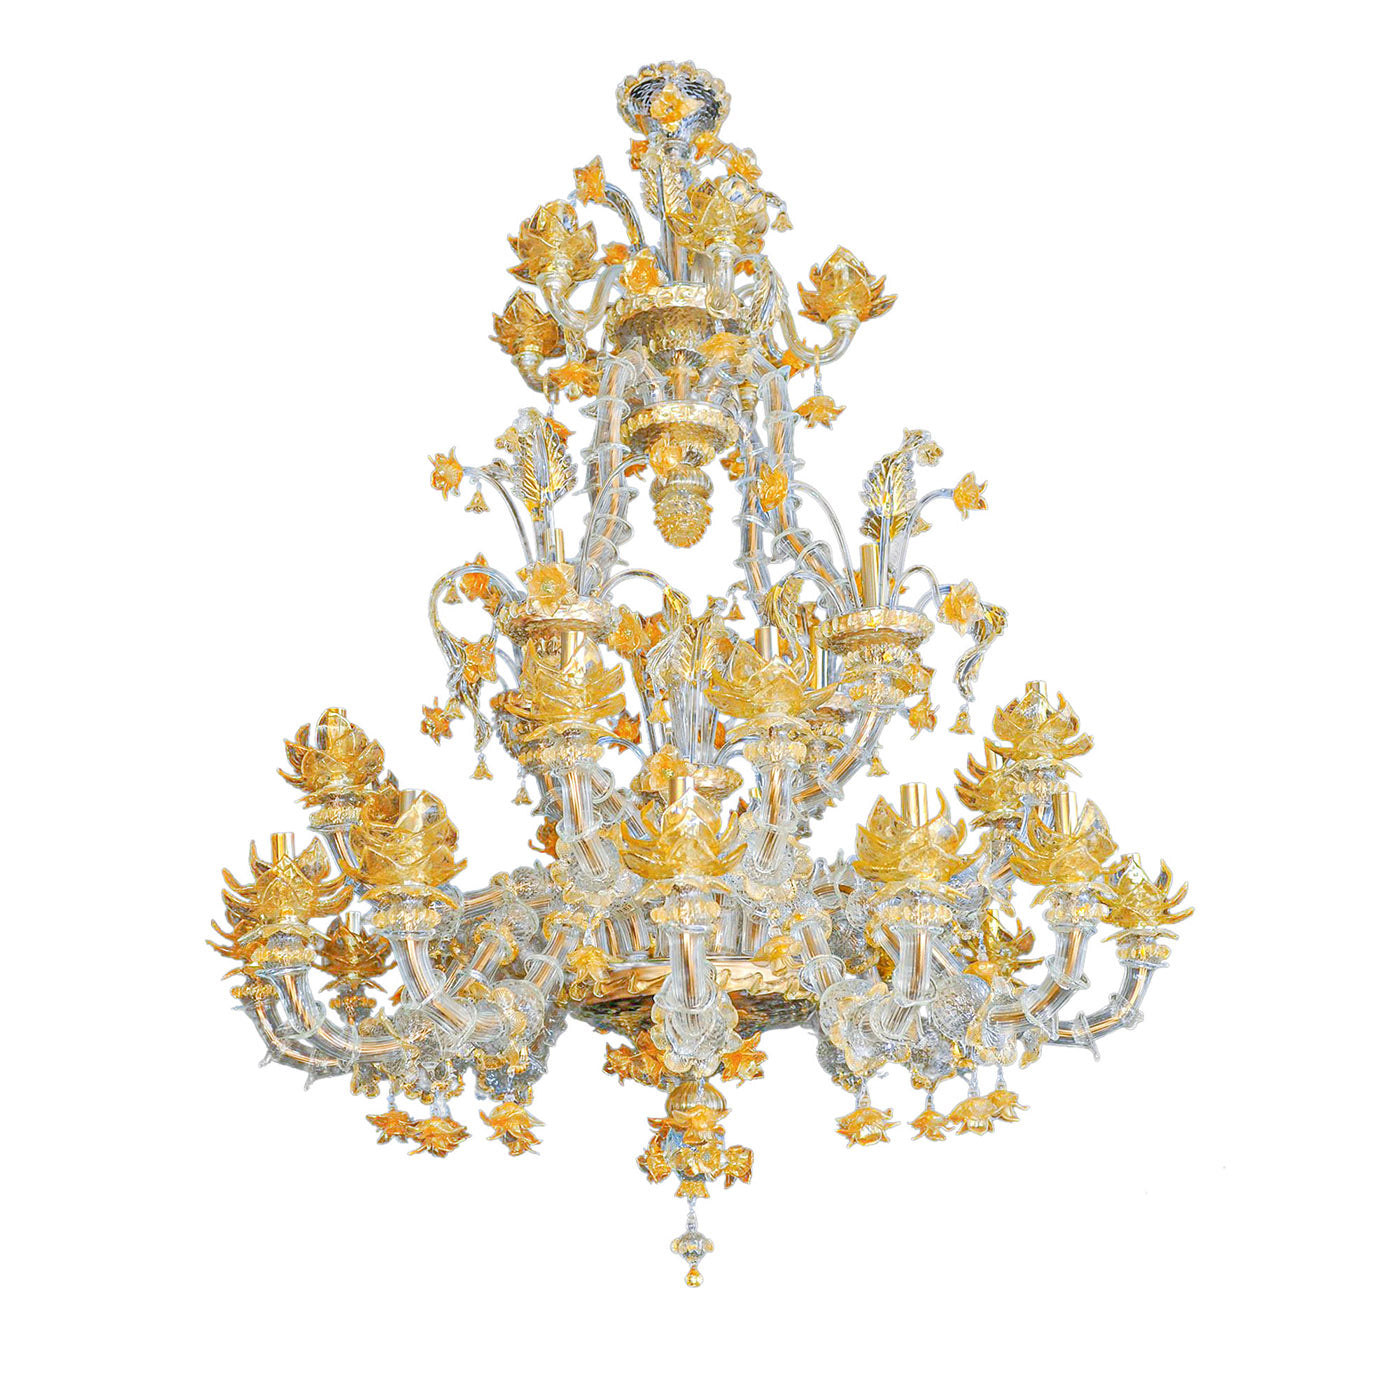 Rezzonico-style Gold and Crystal Chandelier #4 - Main view